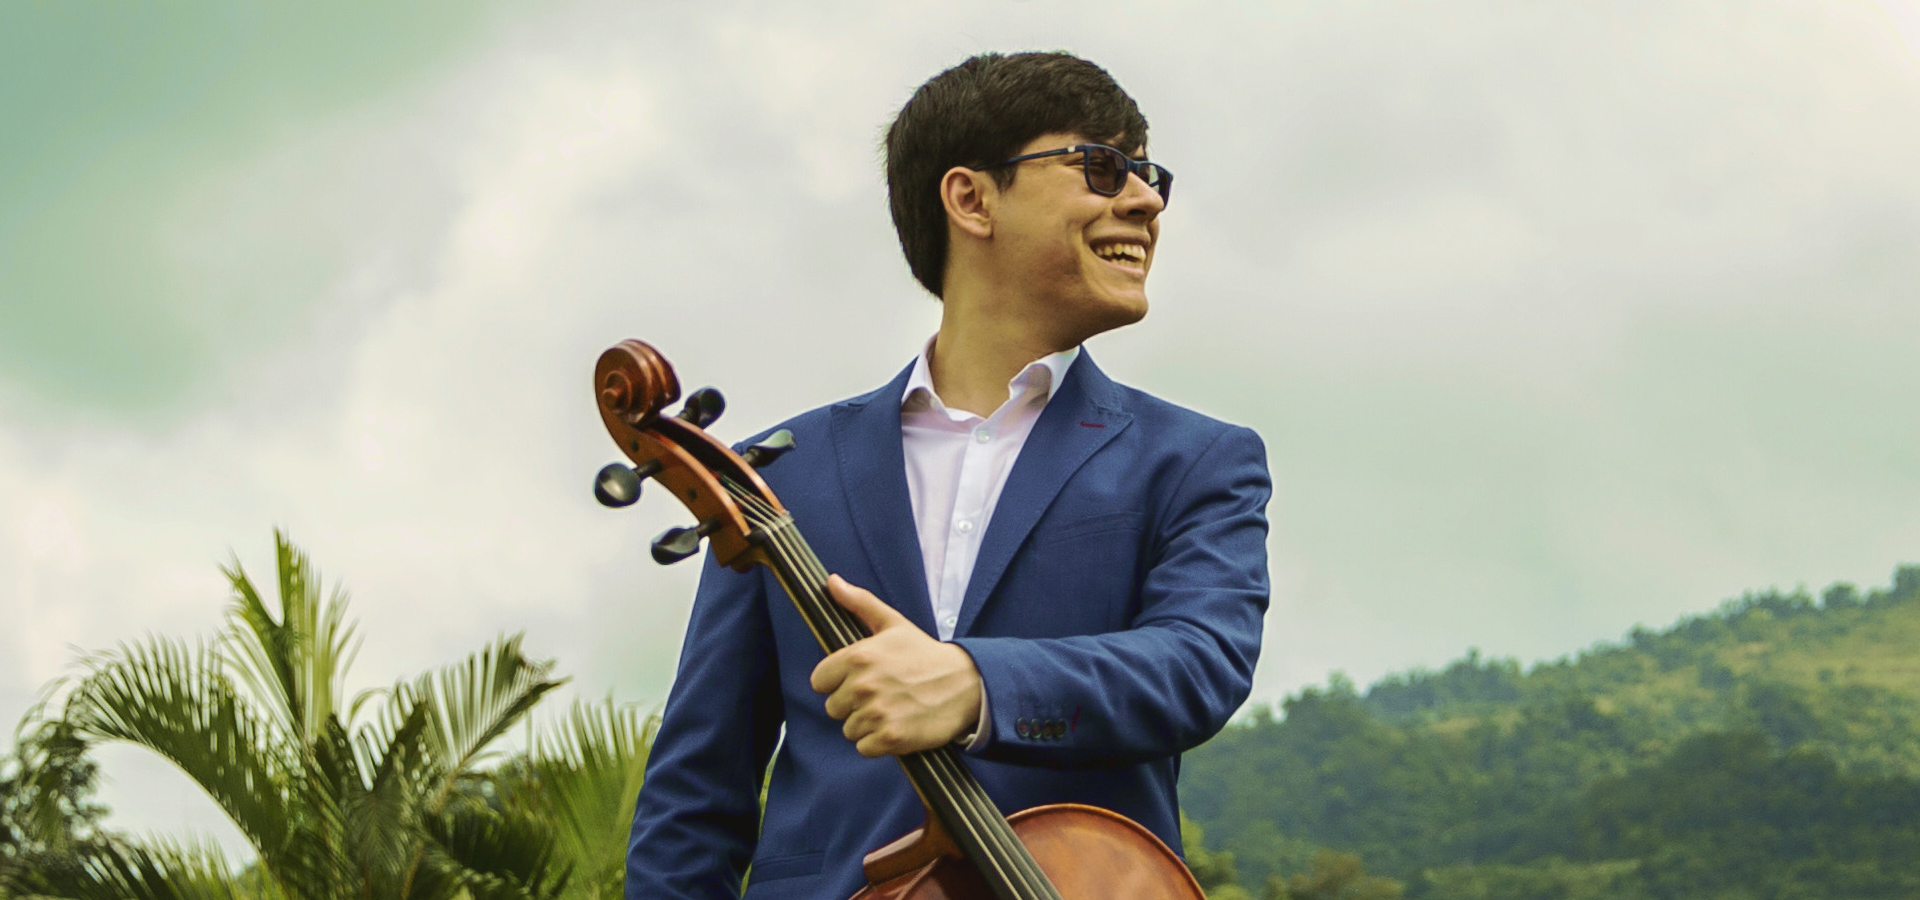 Zlatomir Fung photographed in outdoors